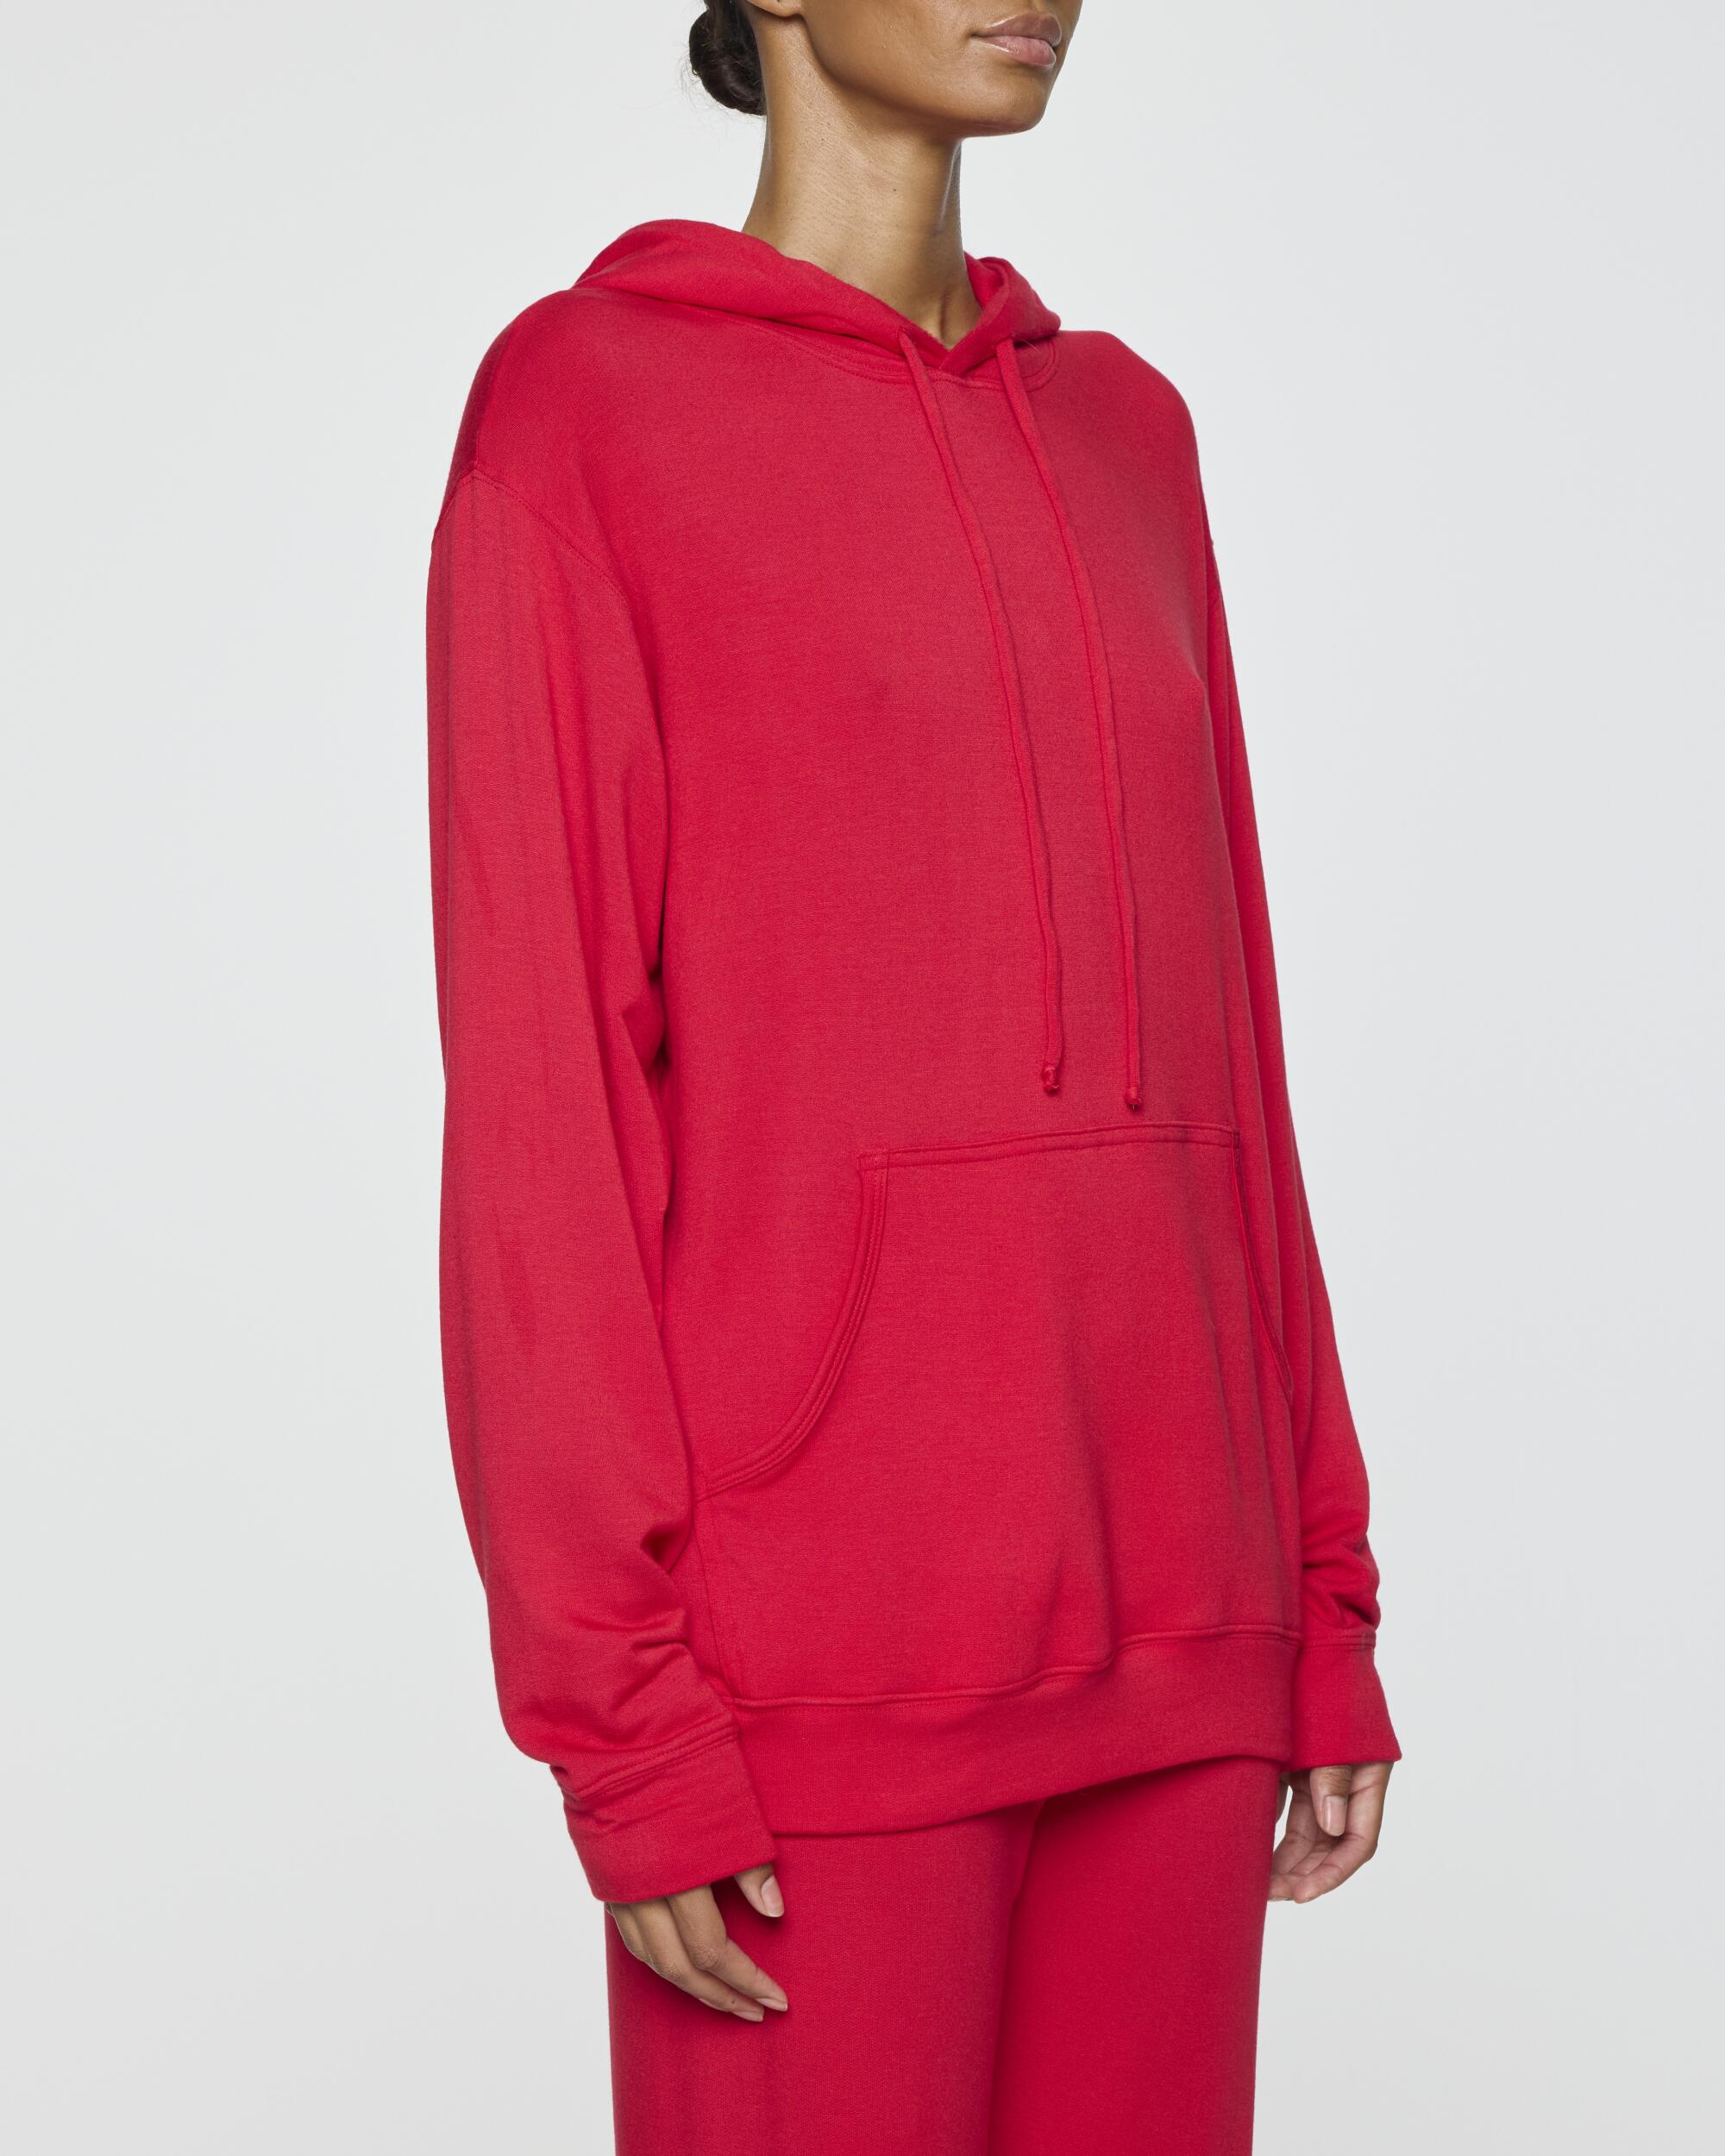 A woman in a red hoodie 